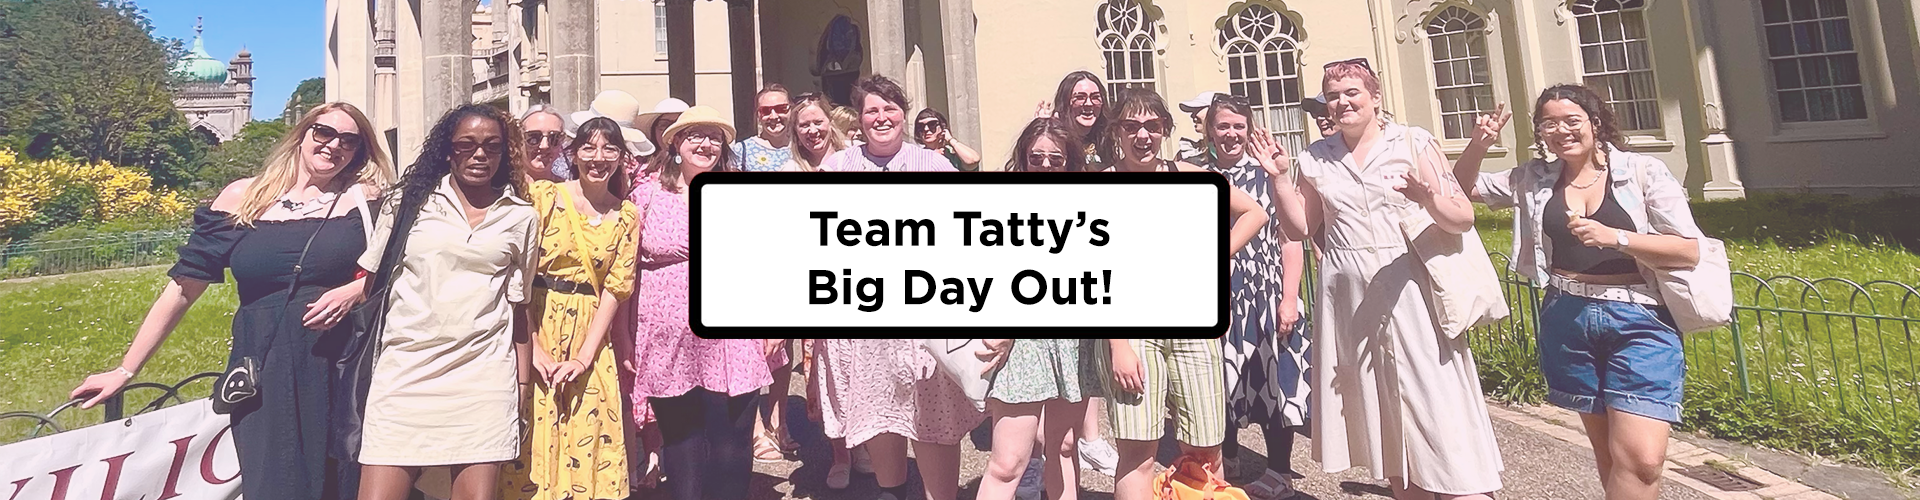 Team Tatty's BIG DAY OUT!